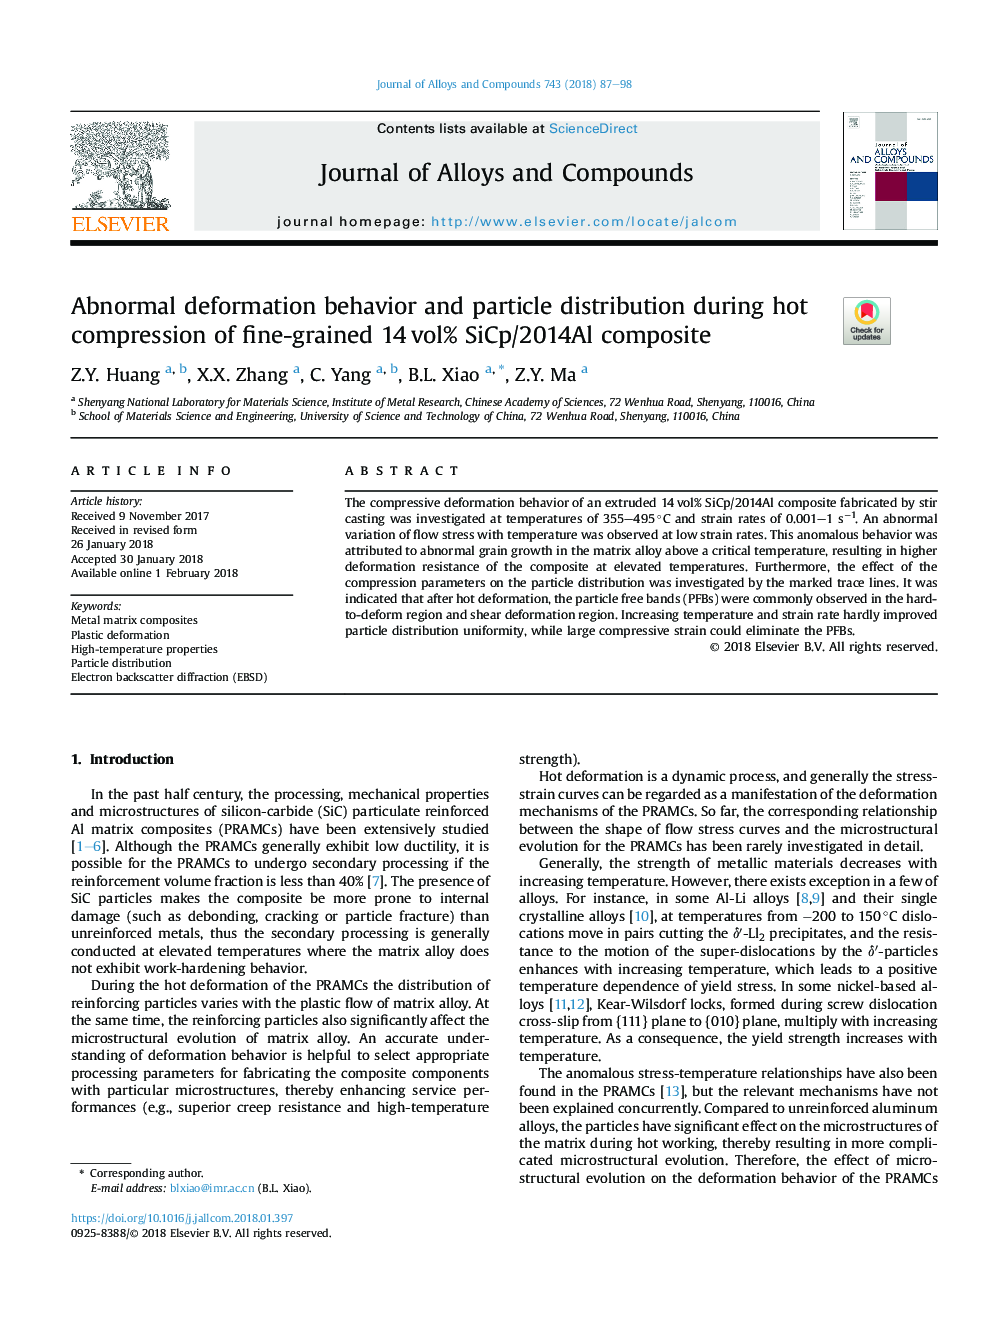 Abnormal deformation behavior and particle distribution during hot compression of fine-grained 14â¯vol% SiCp/2014Al composite